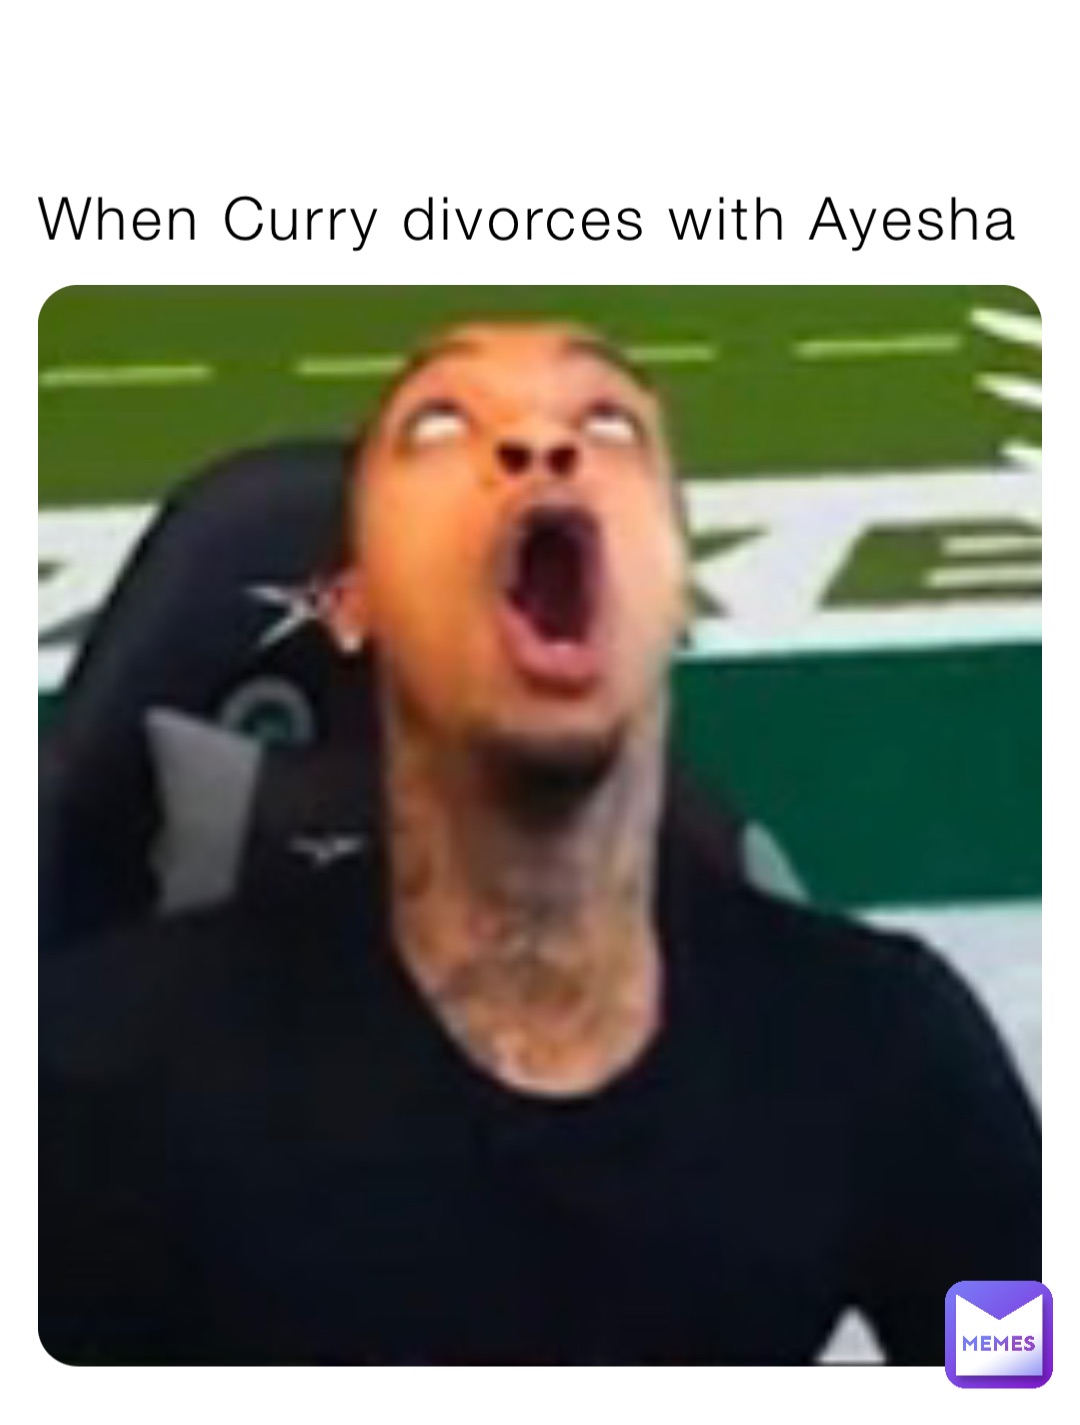 When Curry divorces with Ayesha